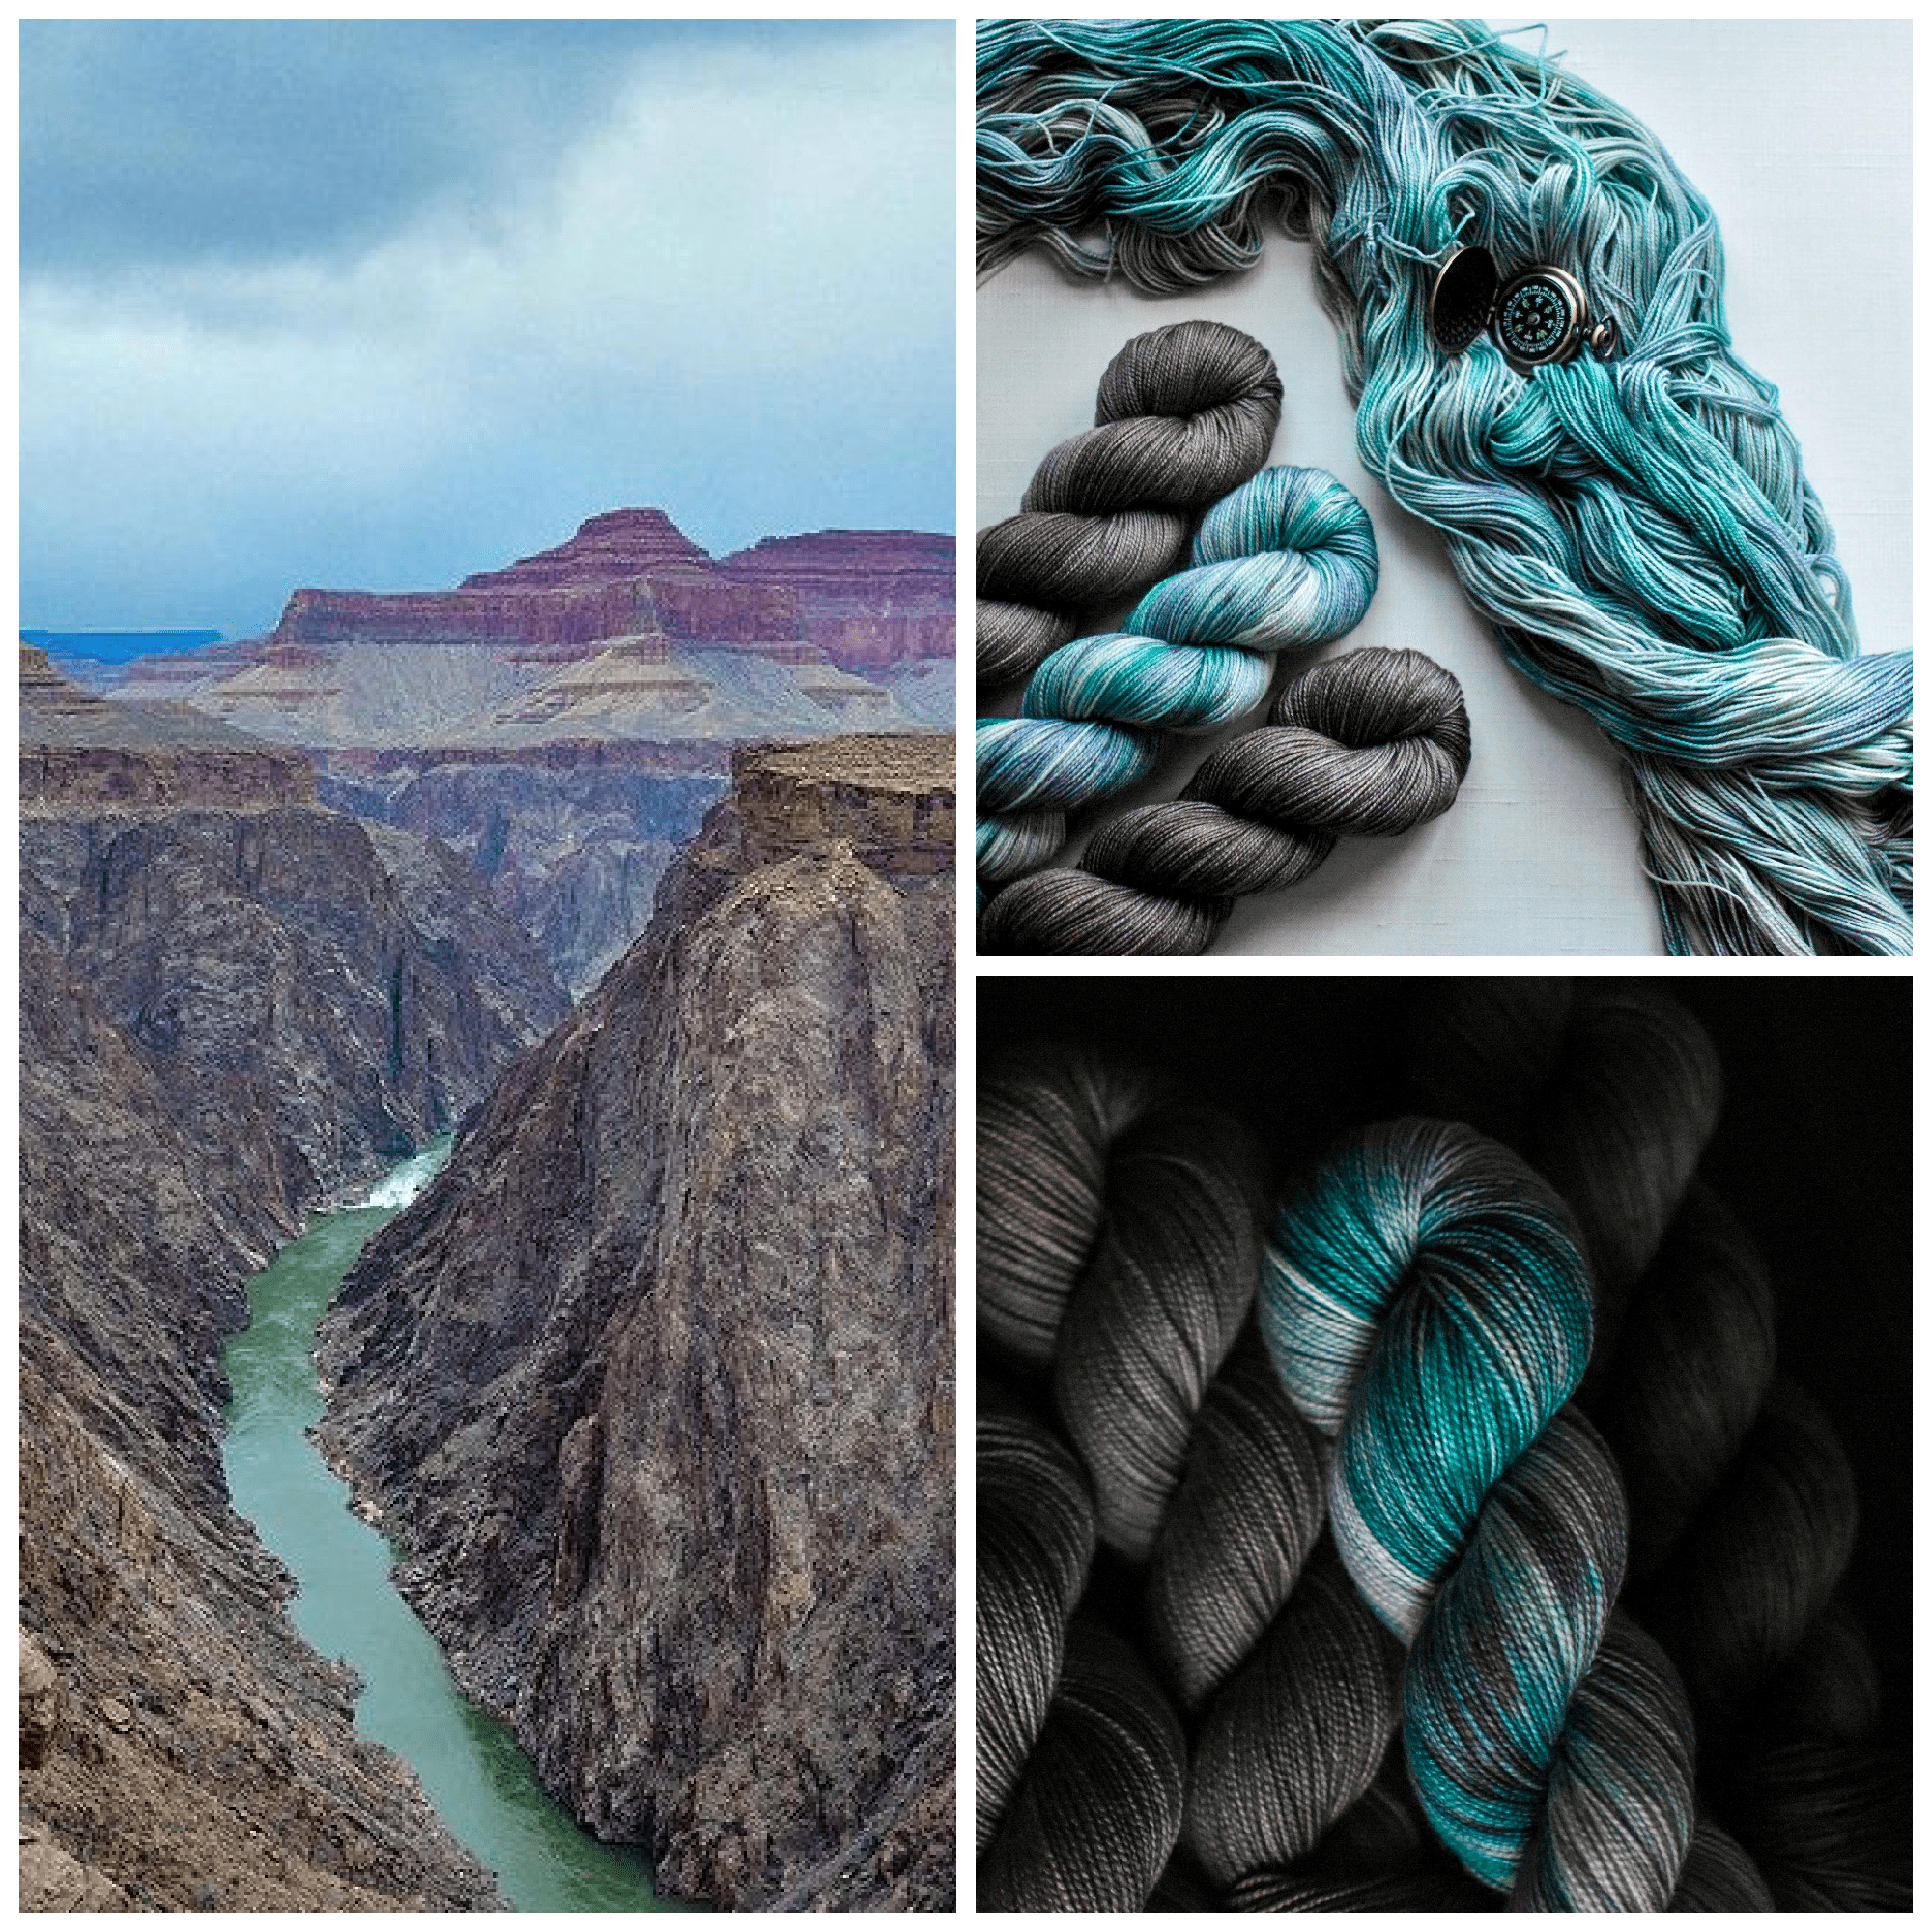 The Grand Canyon with gray, aqua and red, with yarn in aqua and gray.